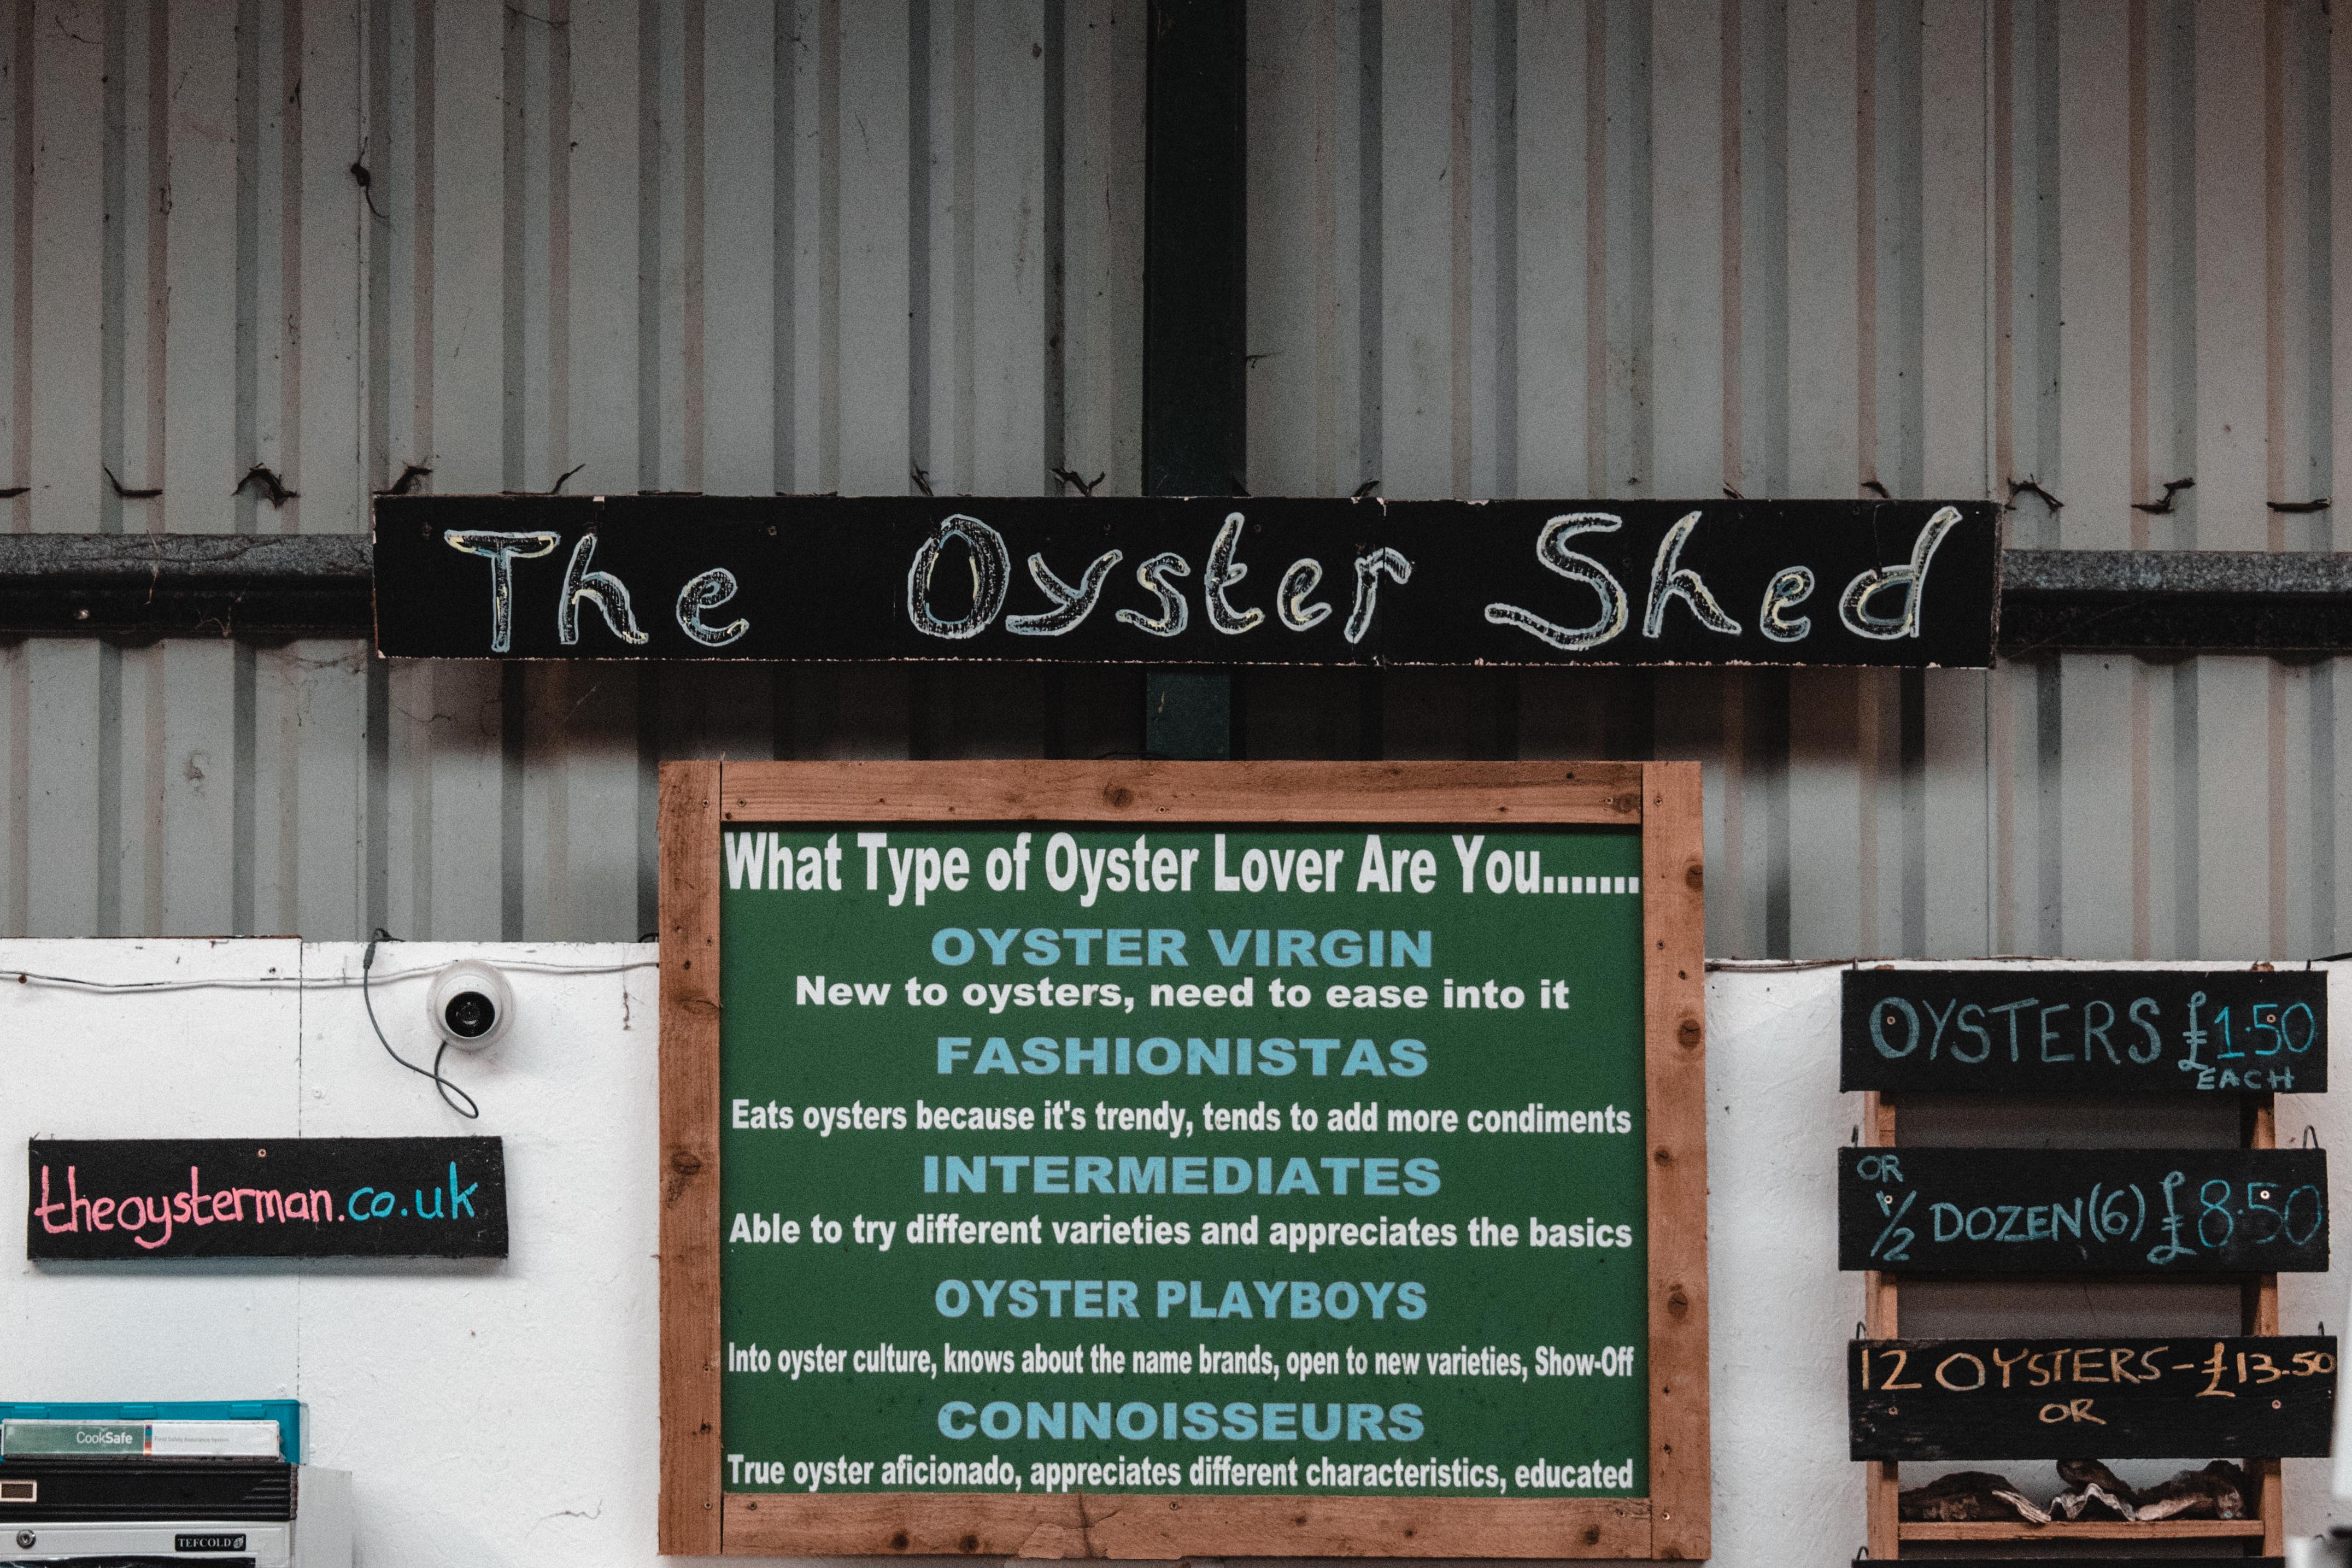 Menu at the Oyster Shed on Skye